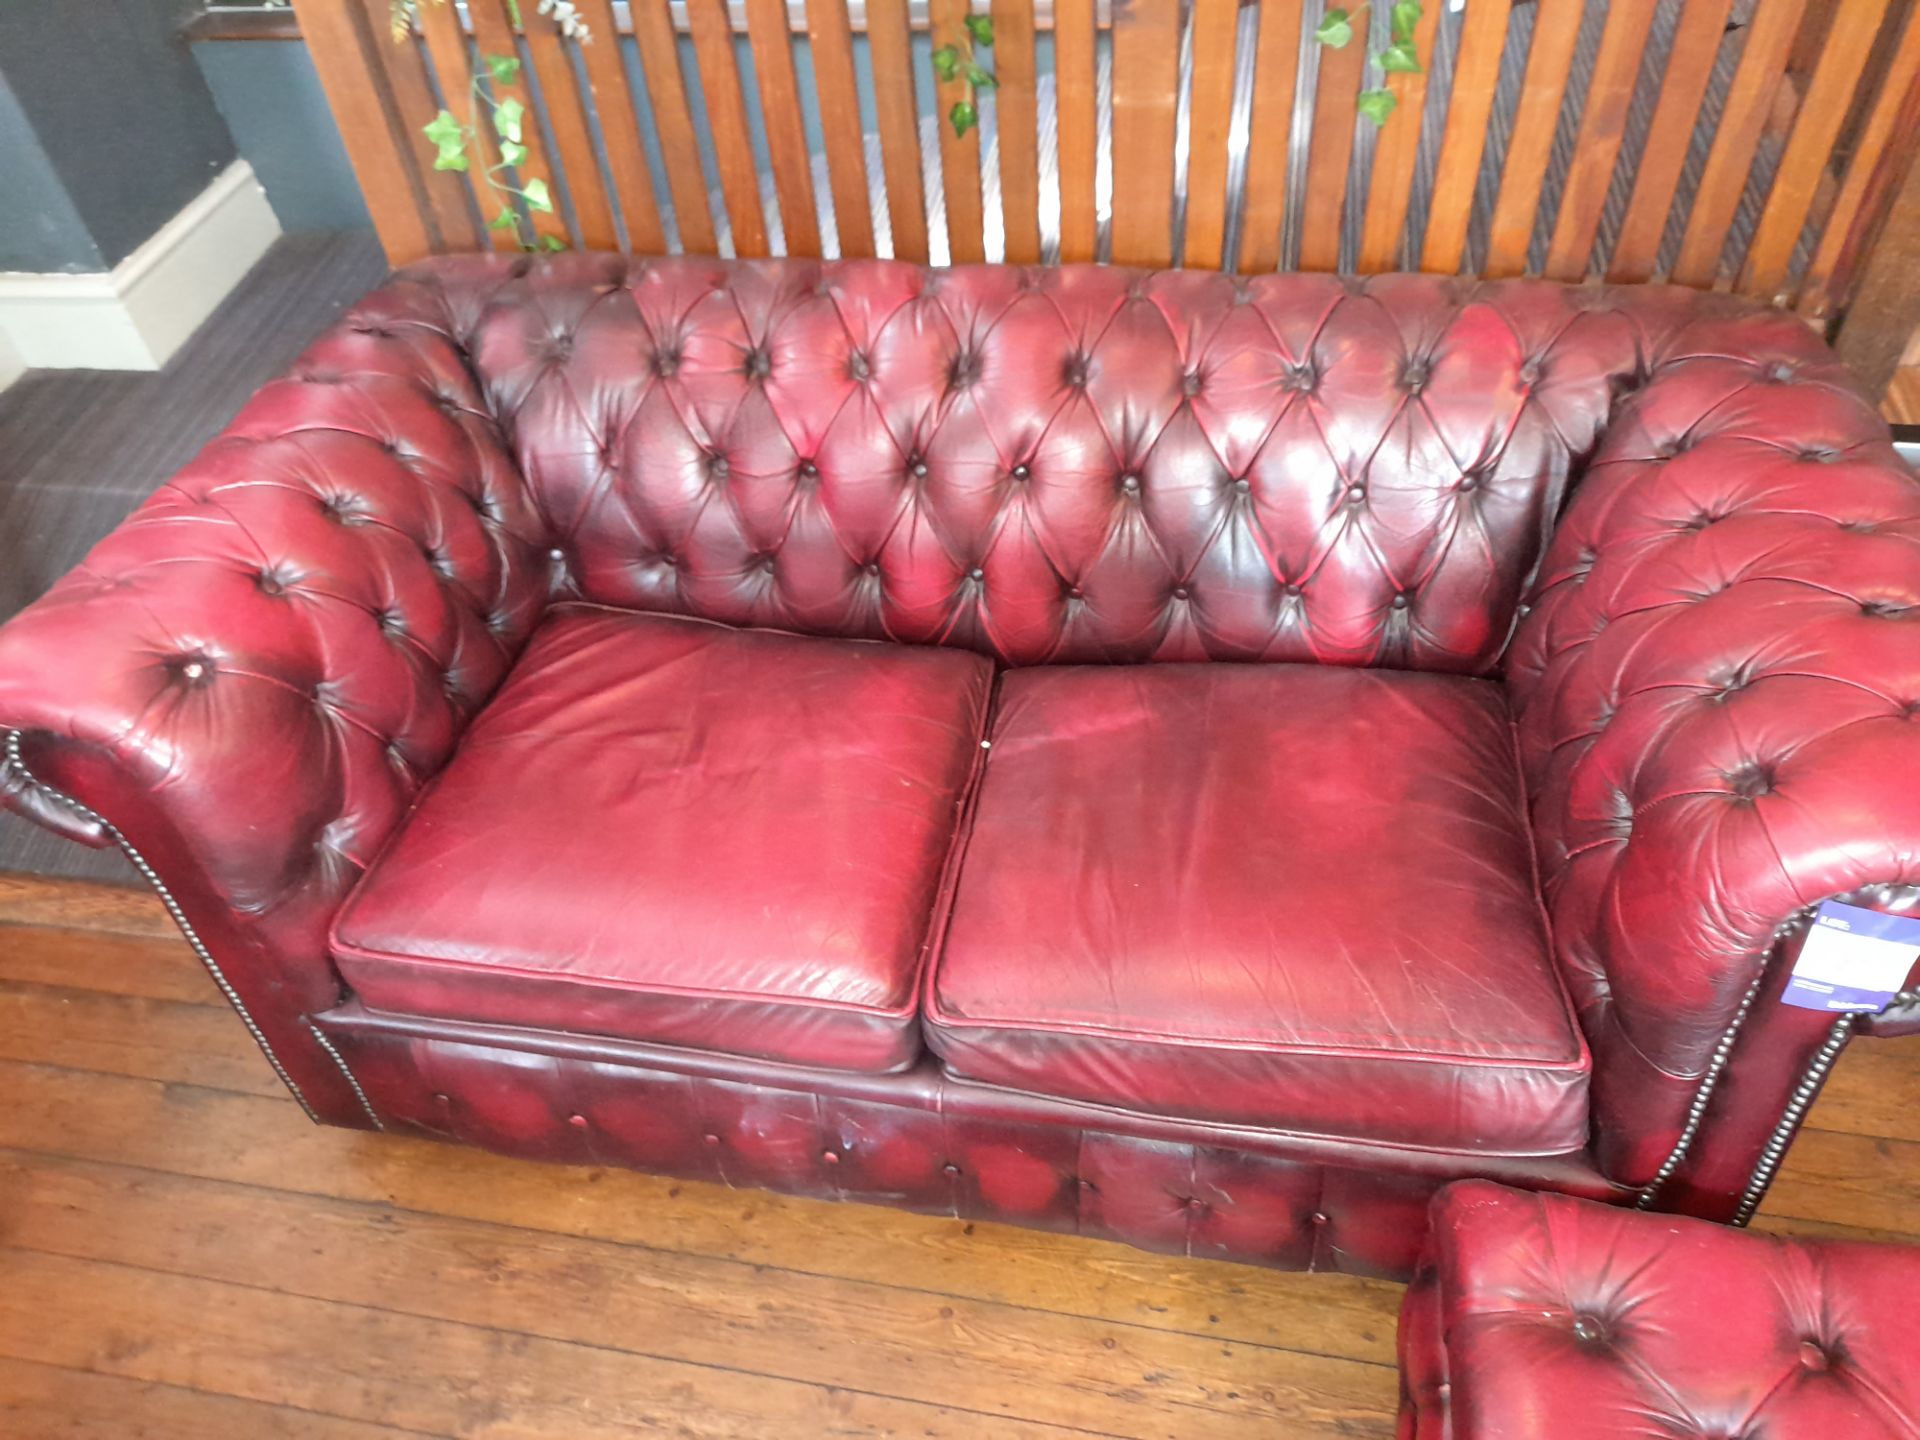 2 Seater Oxblood chesterfield 2 person sofa and buffet with wood occasional table - Image 2 of 3